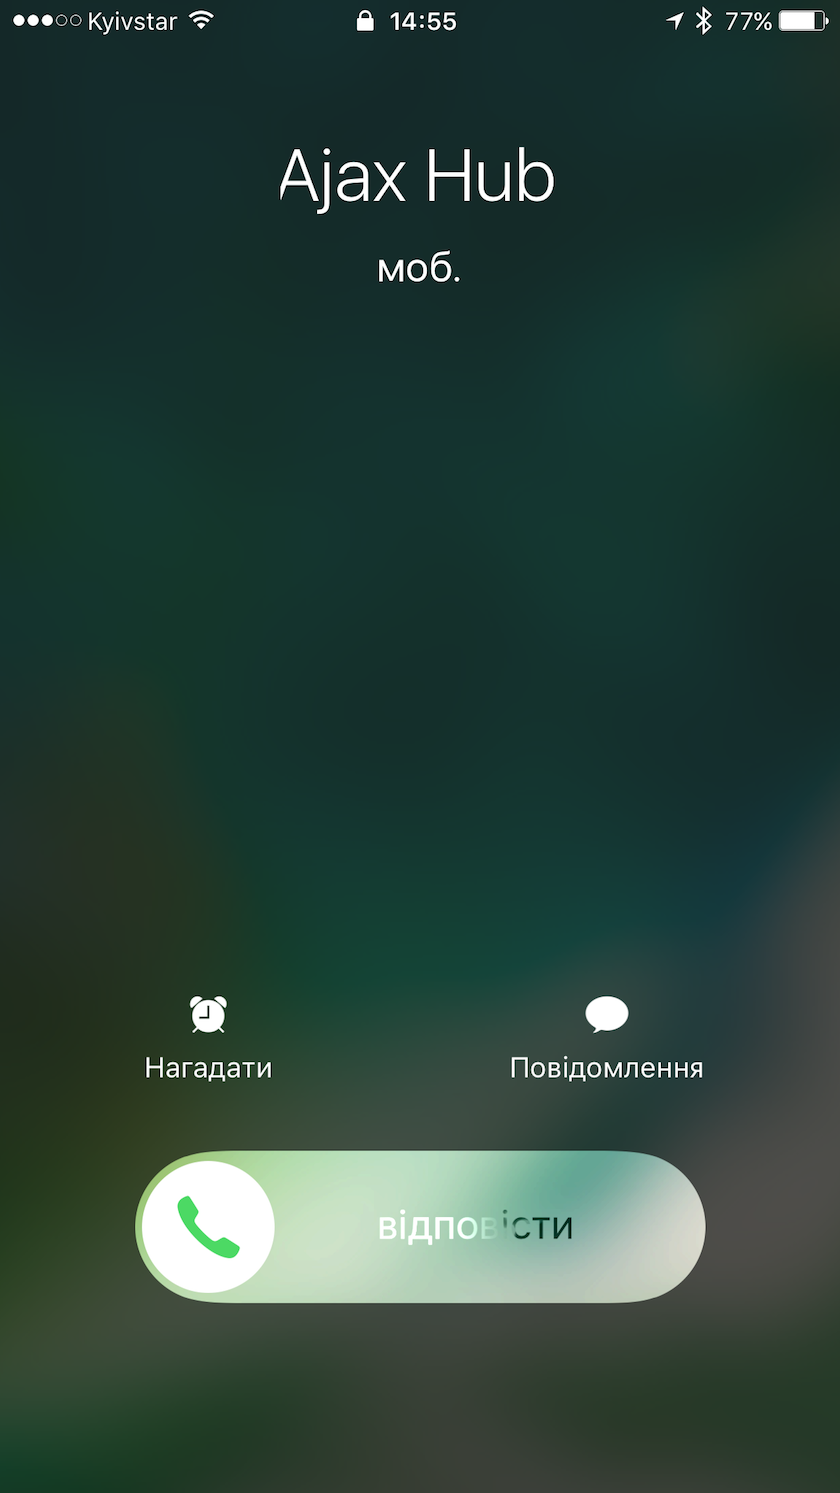 This is what phone call from Ajax Hub looks like